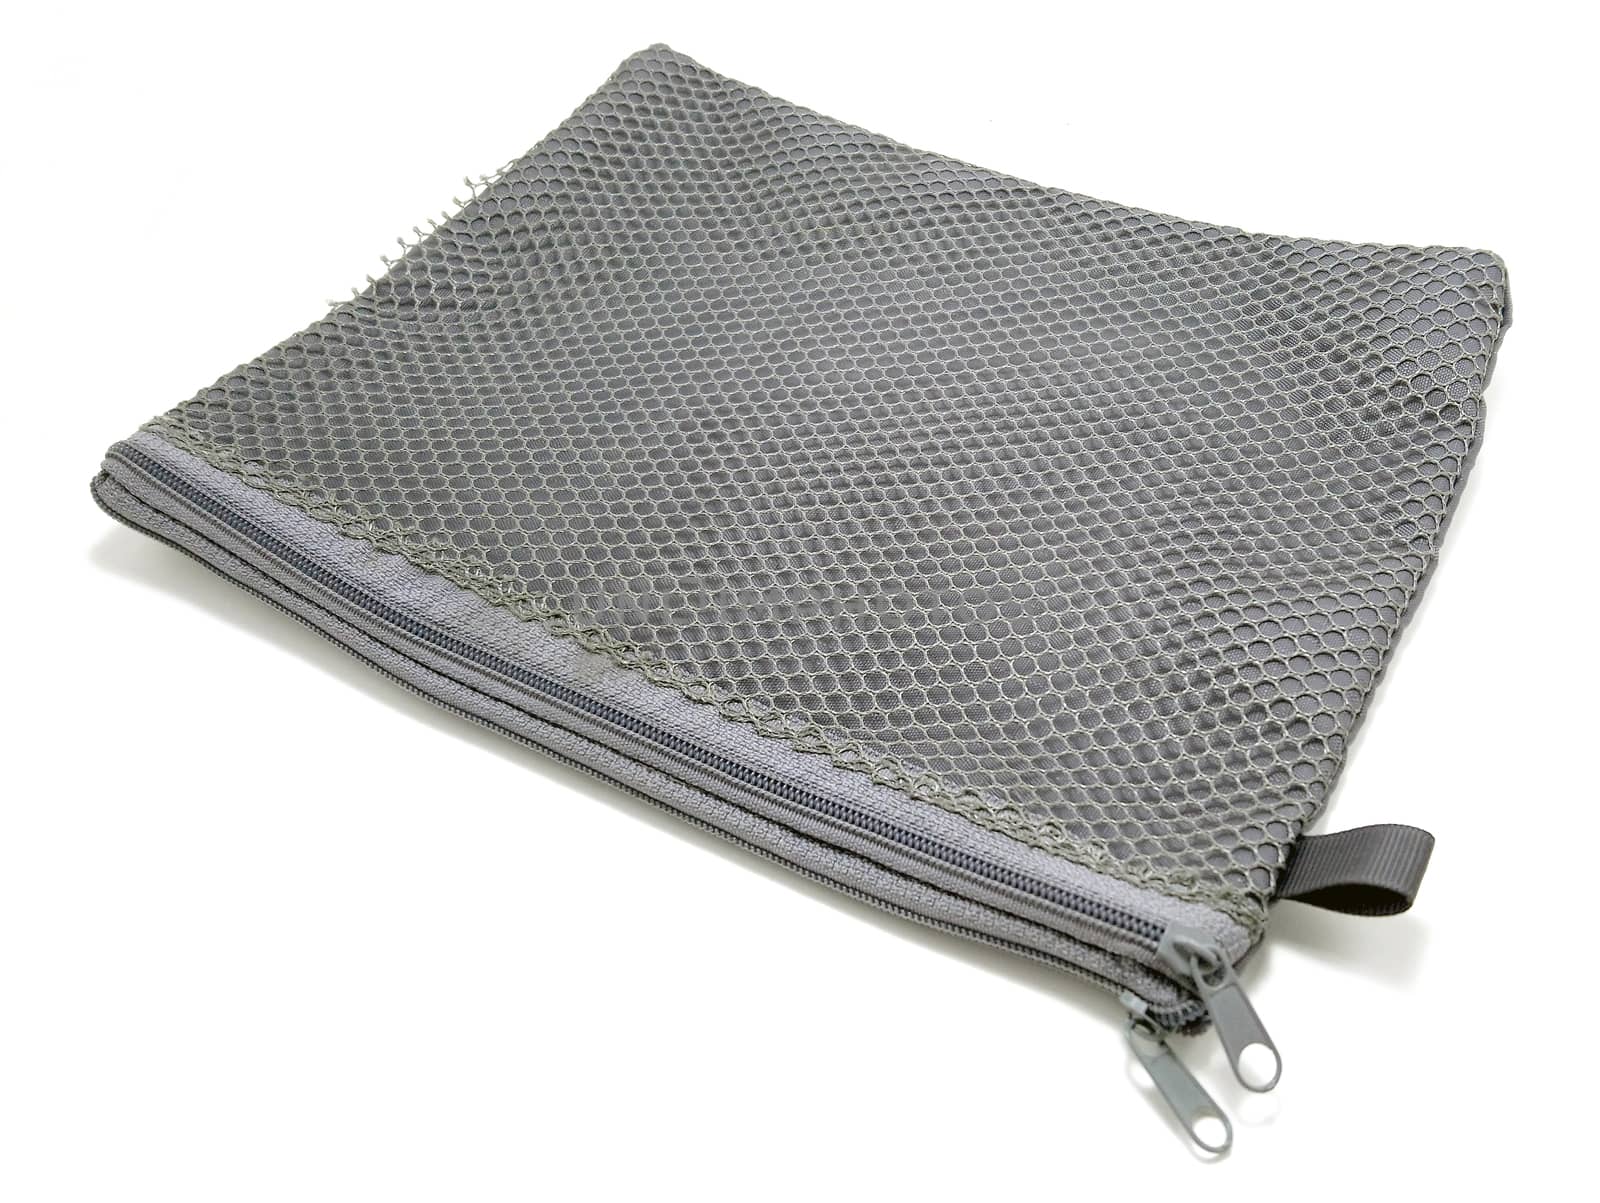 Small gray mesh bag with zipper by imwaltersy